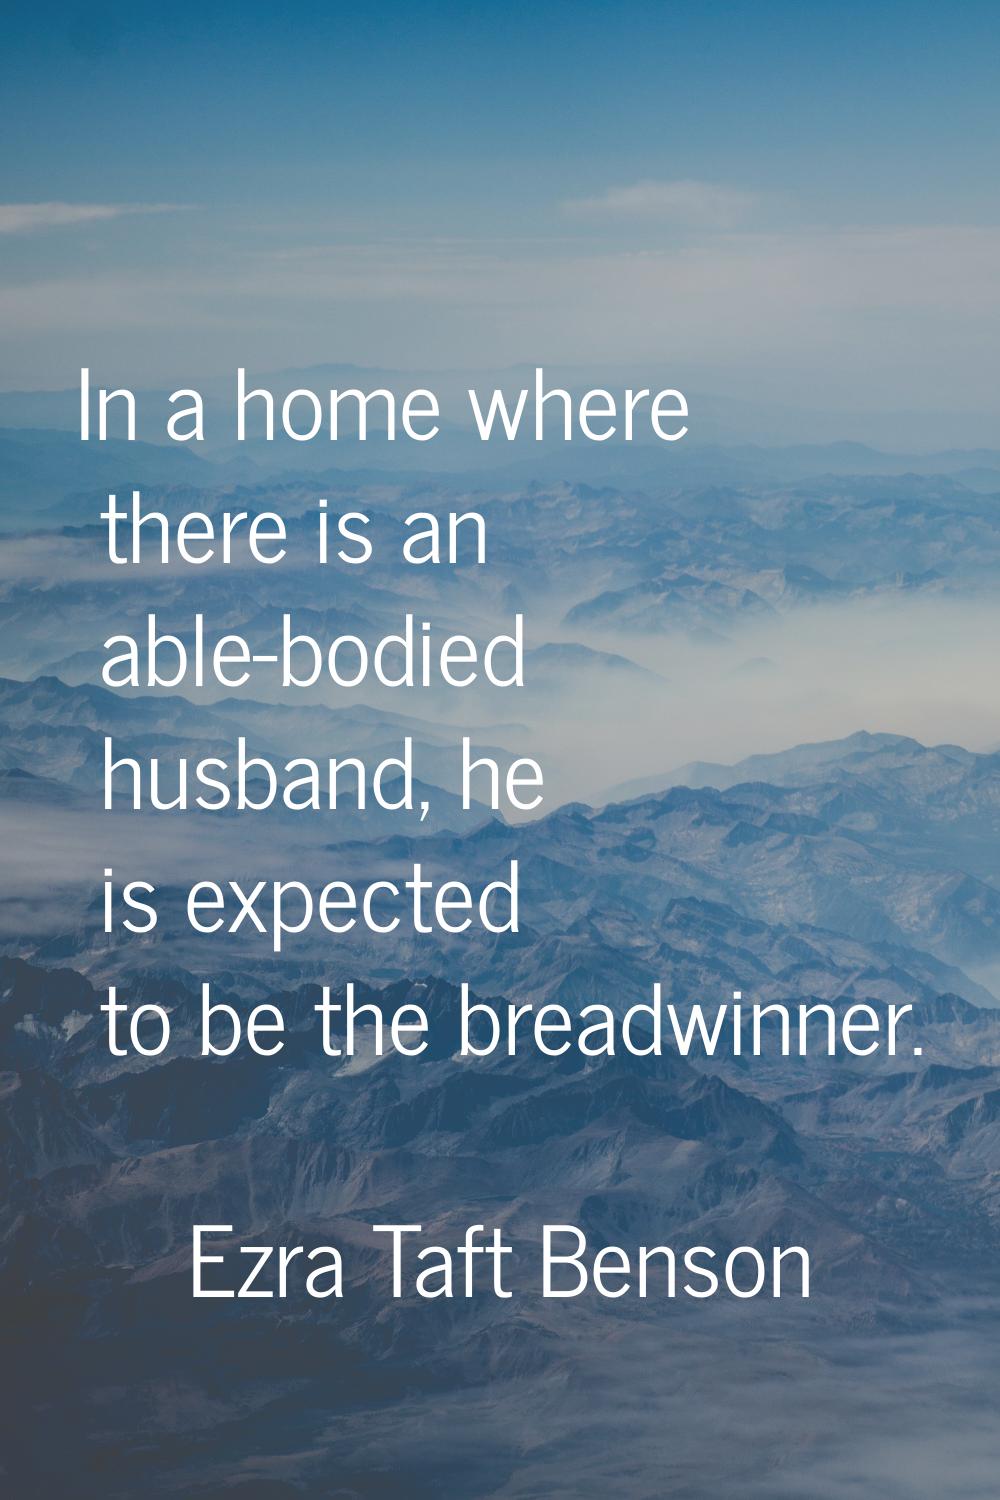 In a home where there is an able-bodied husband, he is expected to be the breadwinner.